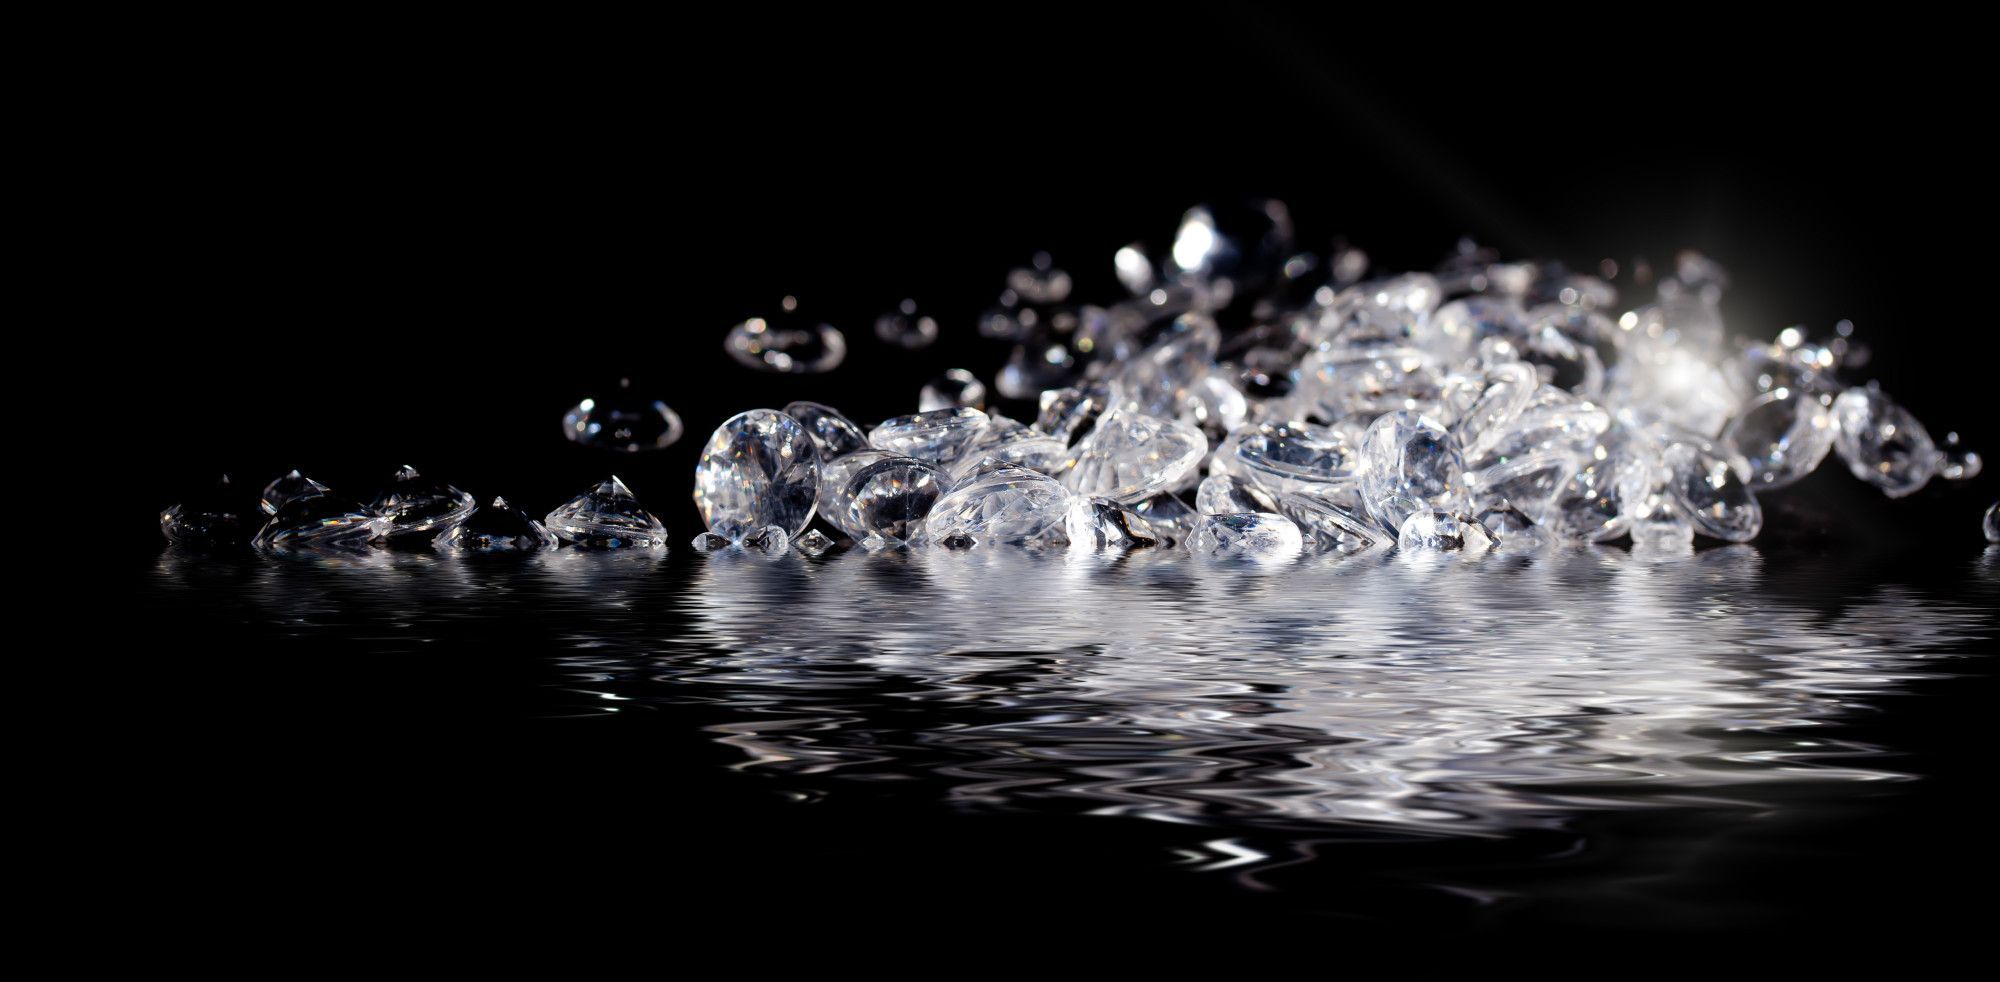 Best Diamond Wallpapers Hd Onlybackground